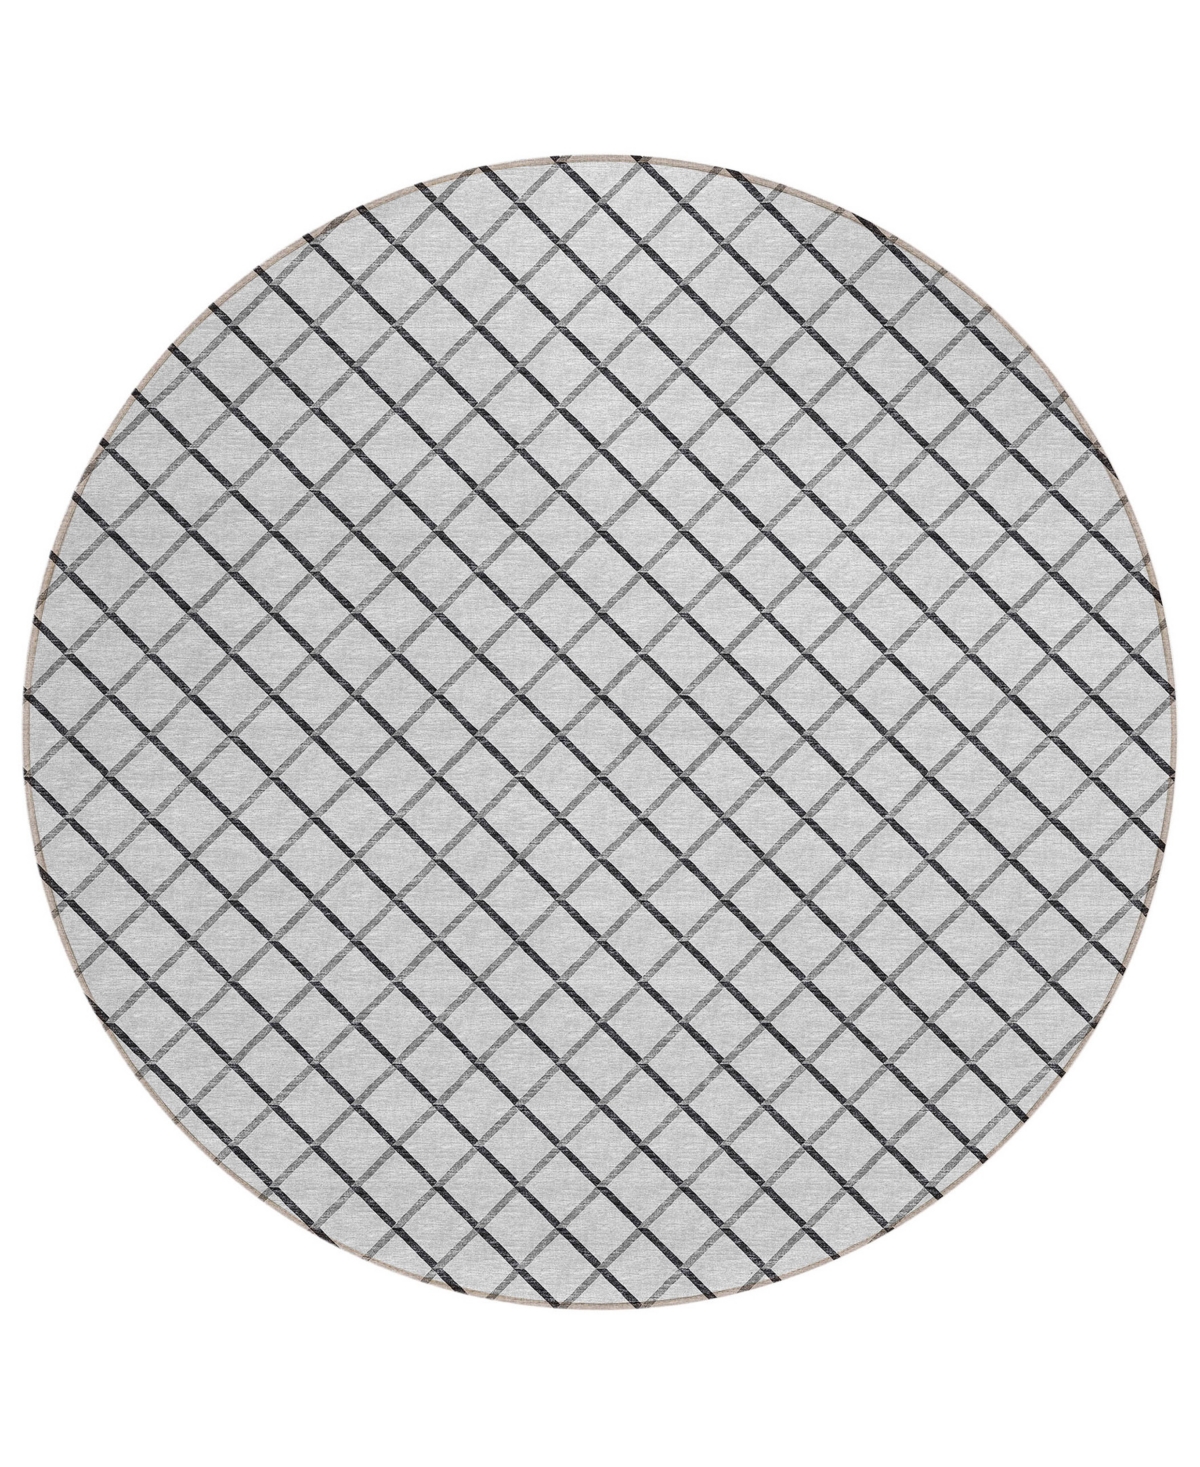 D Style Victory Washable VCY1 10' x 10' Round Area Rug - Gray